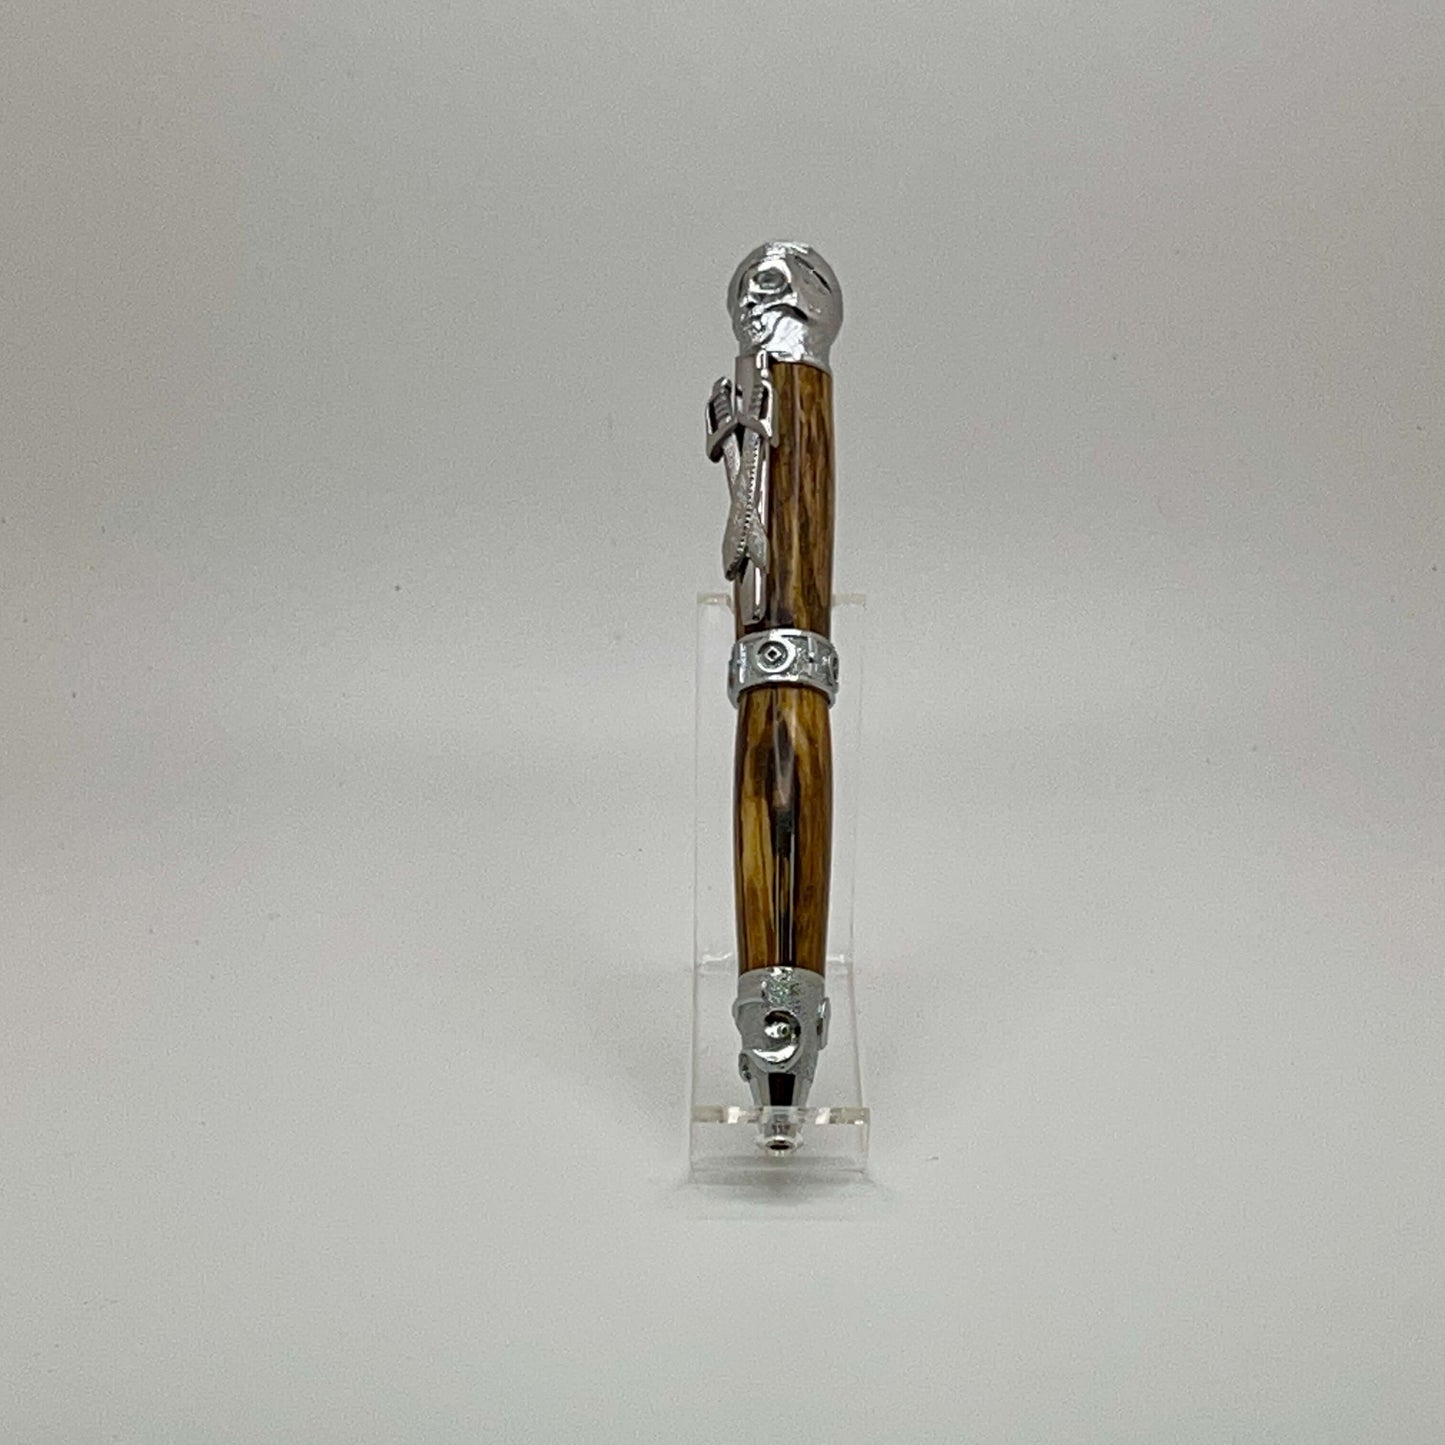 Pamlico Pirate Twist Pen In Chrome- A Treasure for Swashbuckling Adventurers